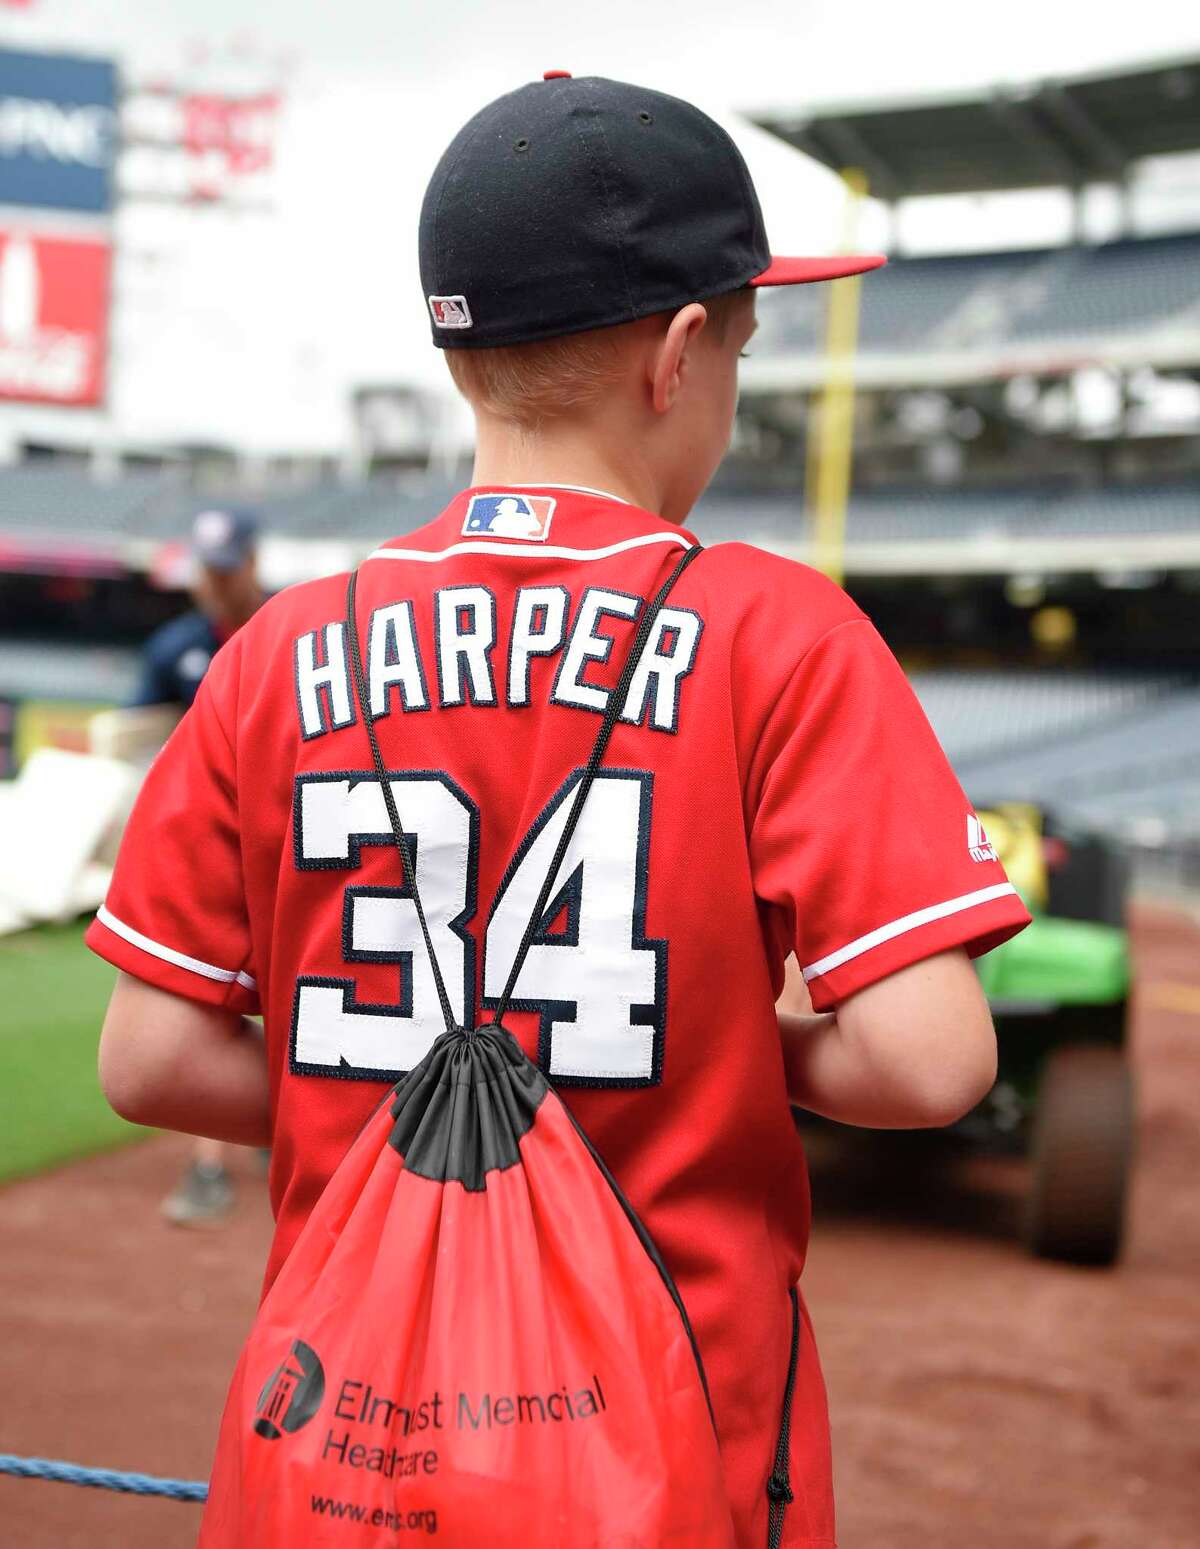 A Washington Nationals fan wears a Bryce Harper jersey before a baseball game between the Washington Nationals and the Atlanta Braves, Thursday, July 6, 2017, in Washington. Harper, Mike Trout and Aaron Judge have become the face of baseball as a gleaming, modernist ballpark and a city known for its Latino culture host the All-Star Game for the first time. (AP Photo/Nick Wass) ORG XMIT: NY152